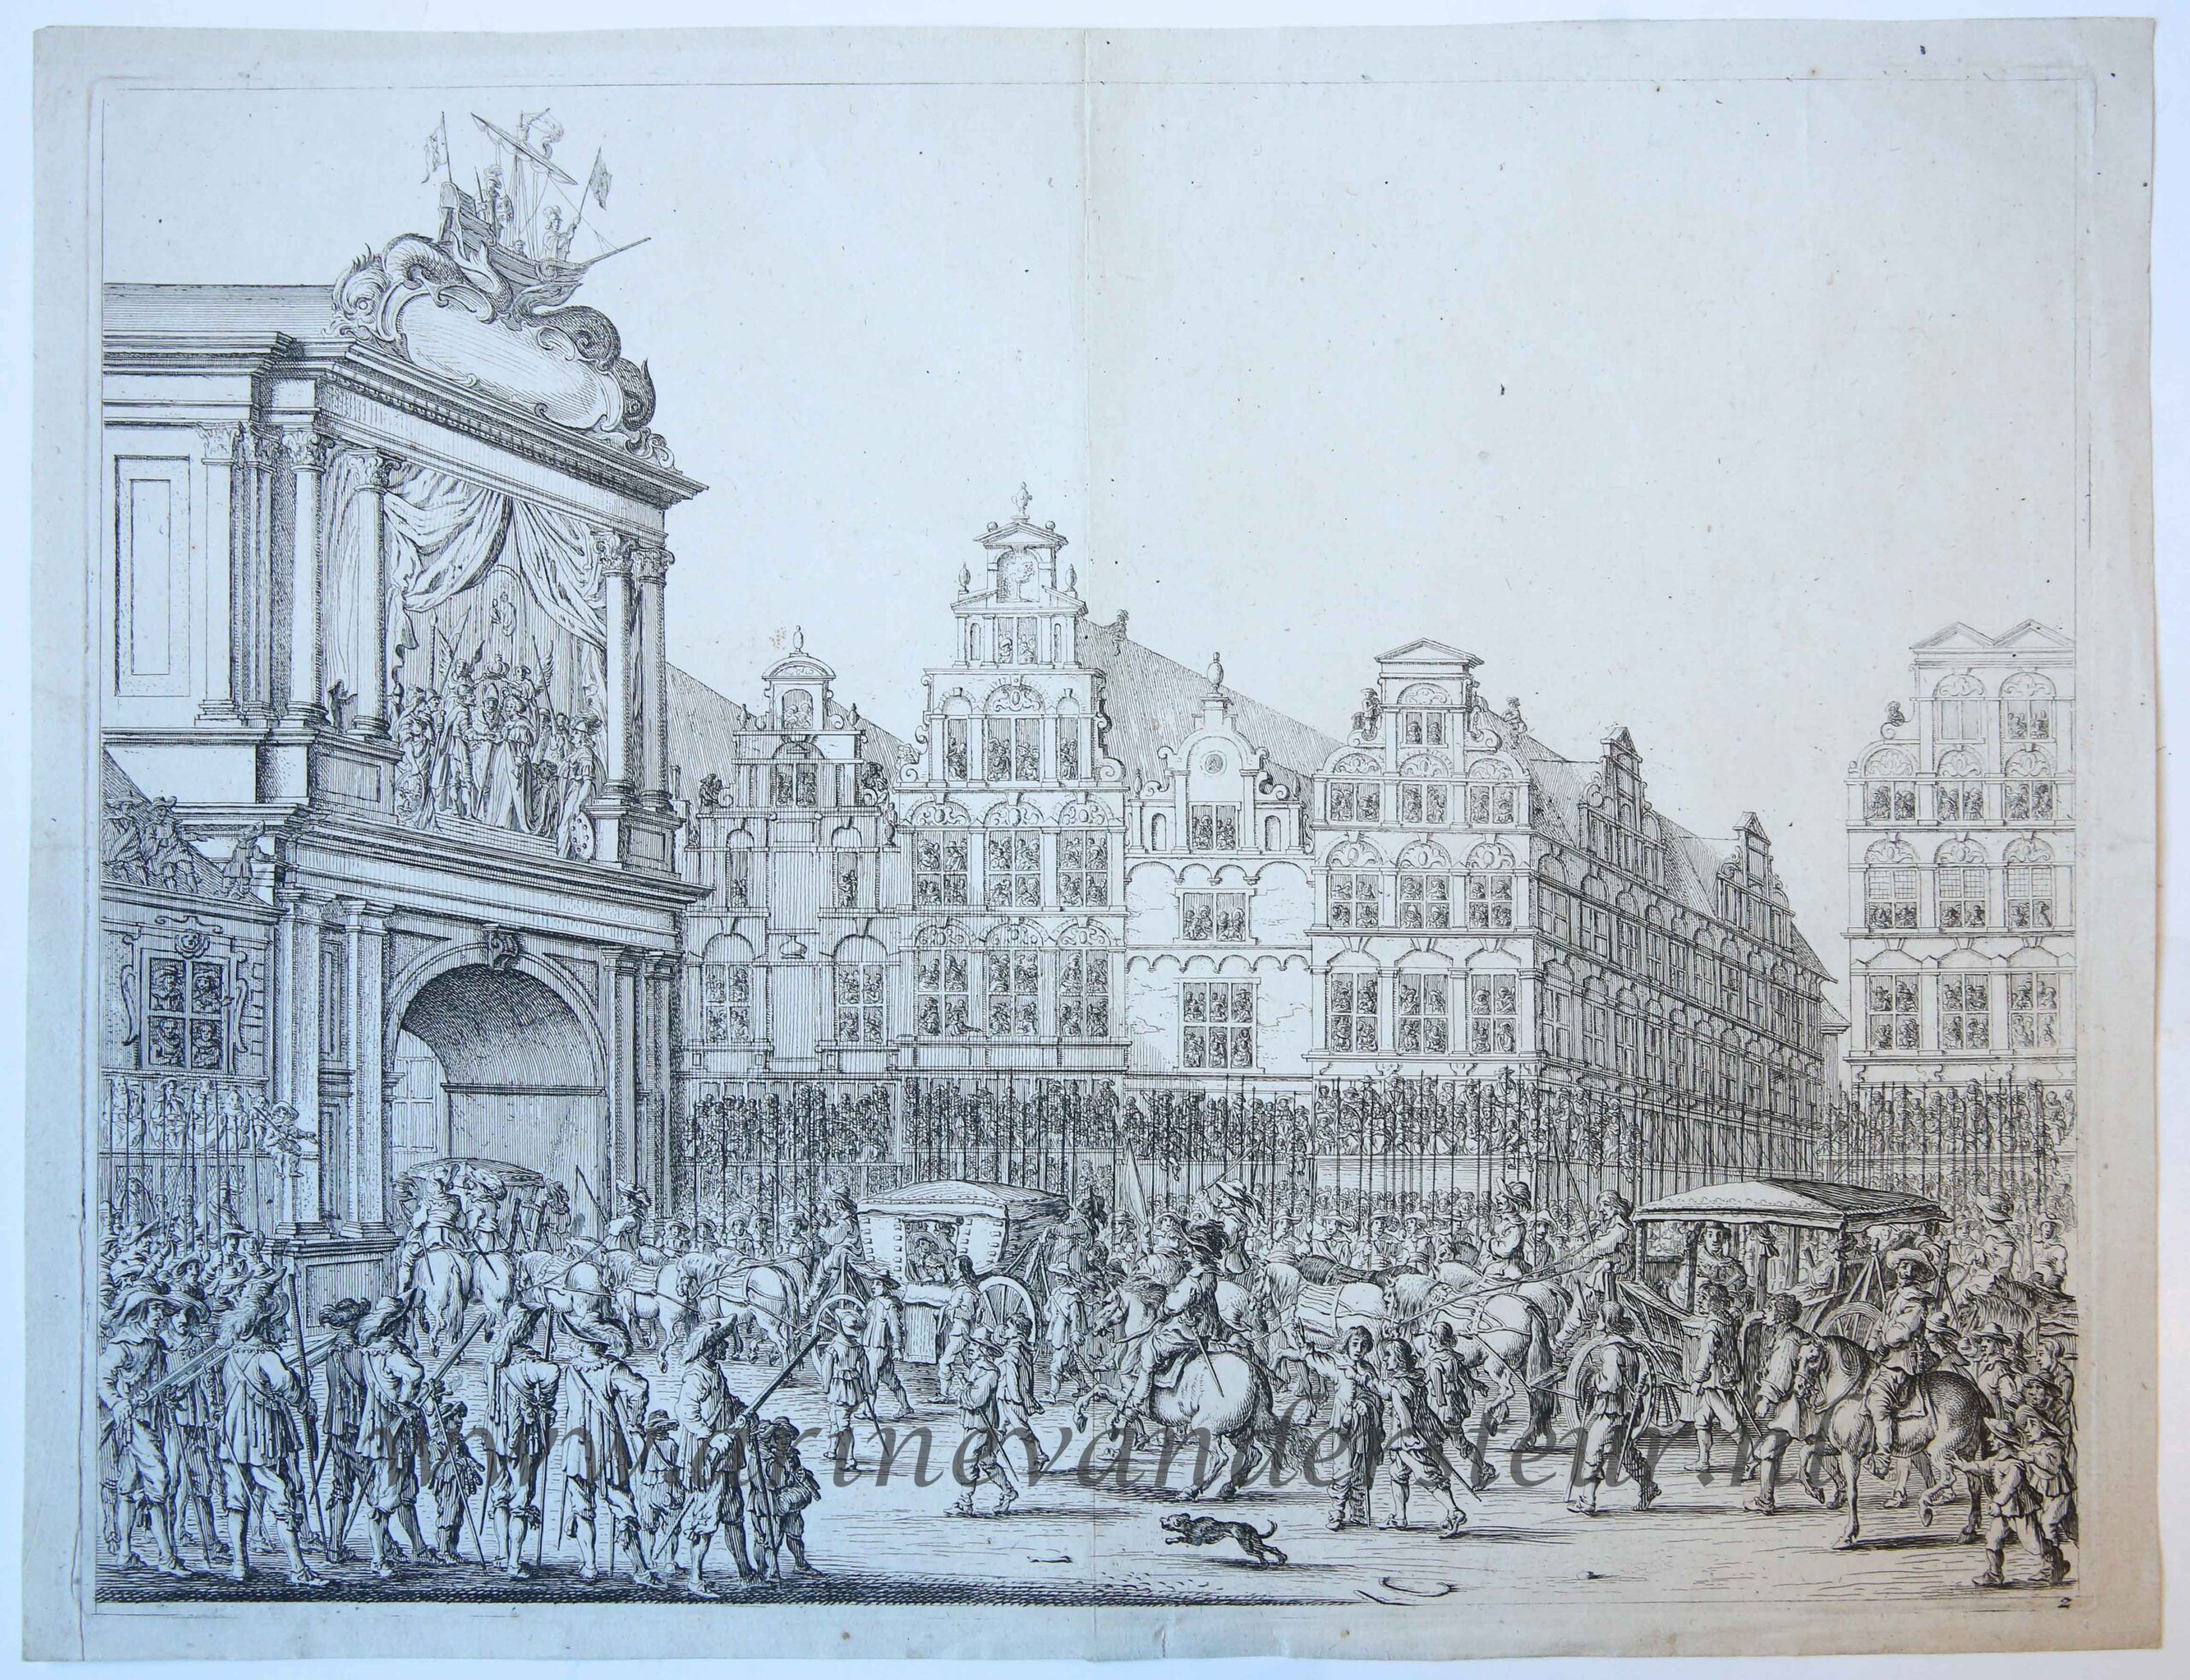 [Antique print, etching] Arrival of procession of Maria de' Medici along the Nieuwendijk on the Dam, 1638, published 1639.